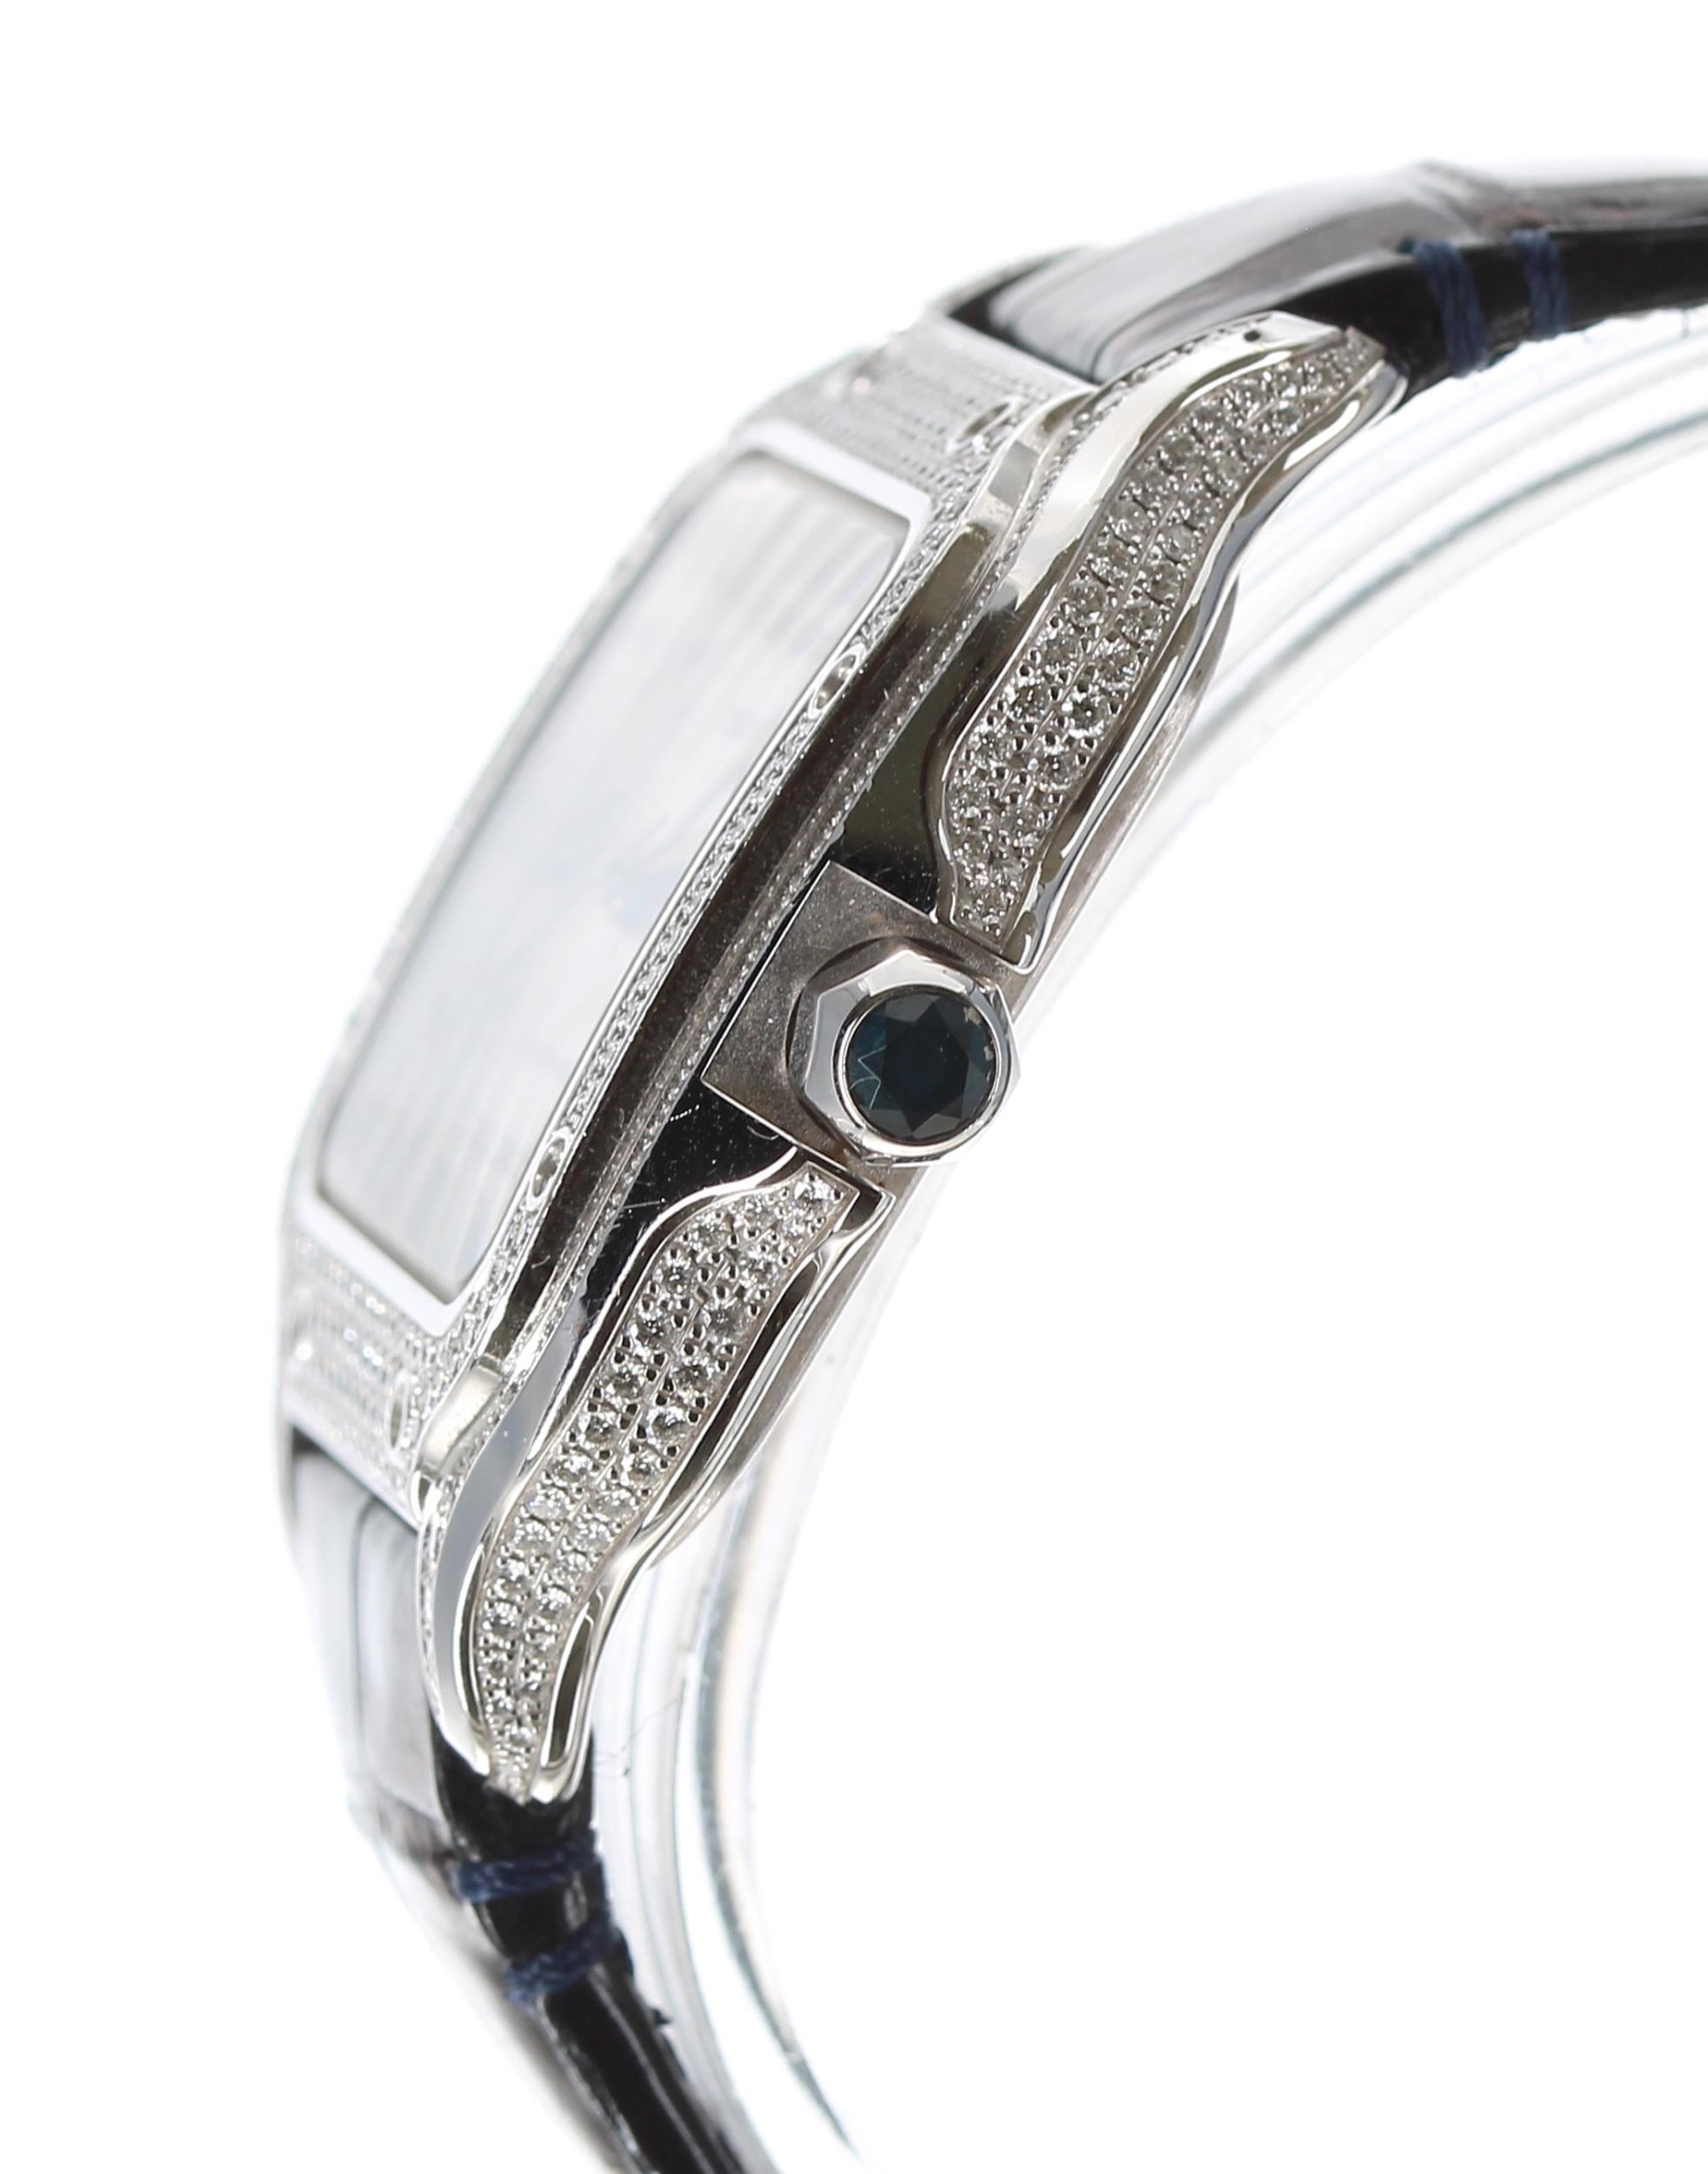 Cartier Santos 18ct white gold diamond set automatic wristwatch, reference no. 4190, serial no. - Image 2 of 4